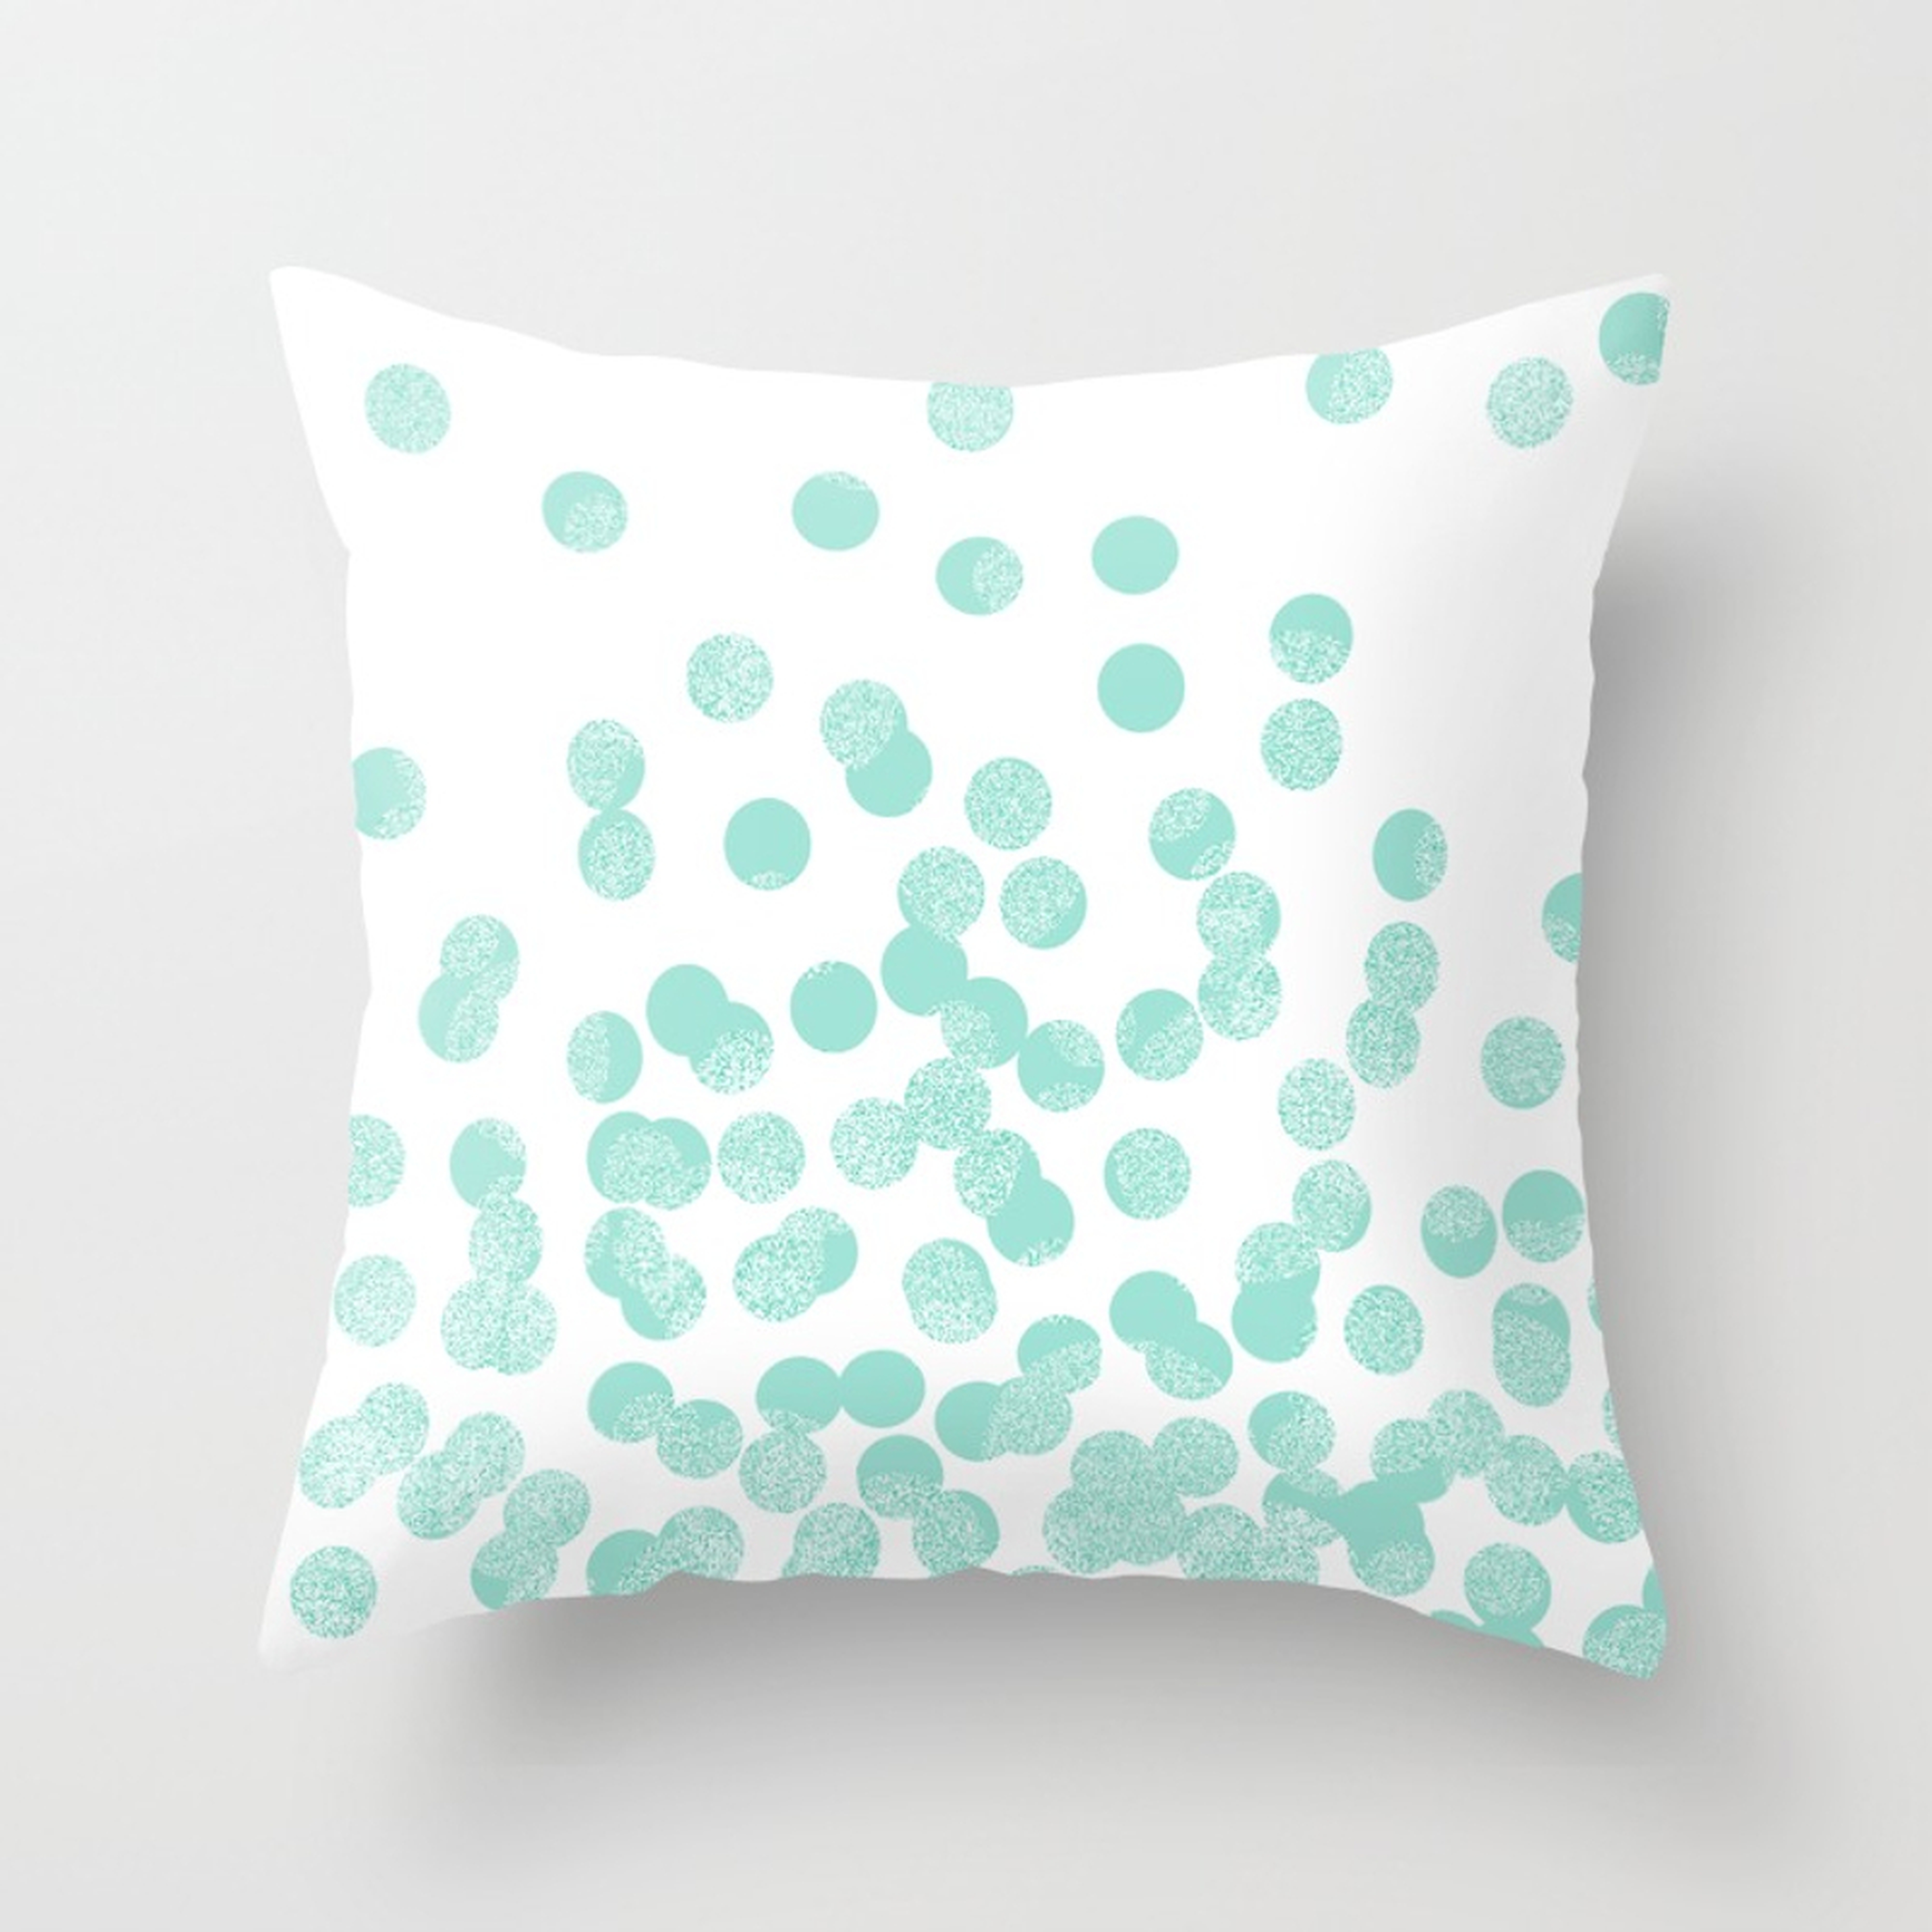 Scattered Glitter Dots in mint, green, pistachio, cool girly cute colors for trendy cell phone case Throw Pillow - Indoor Cover (16" x 16") with - Society6